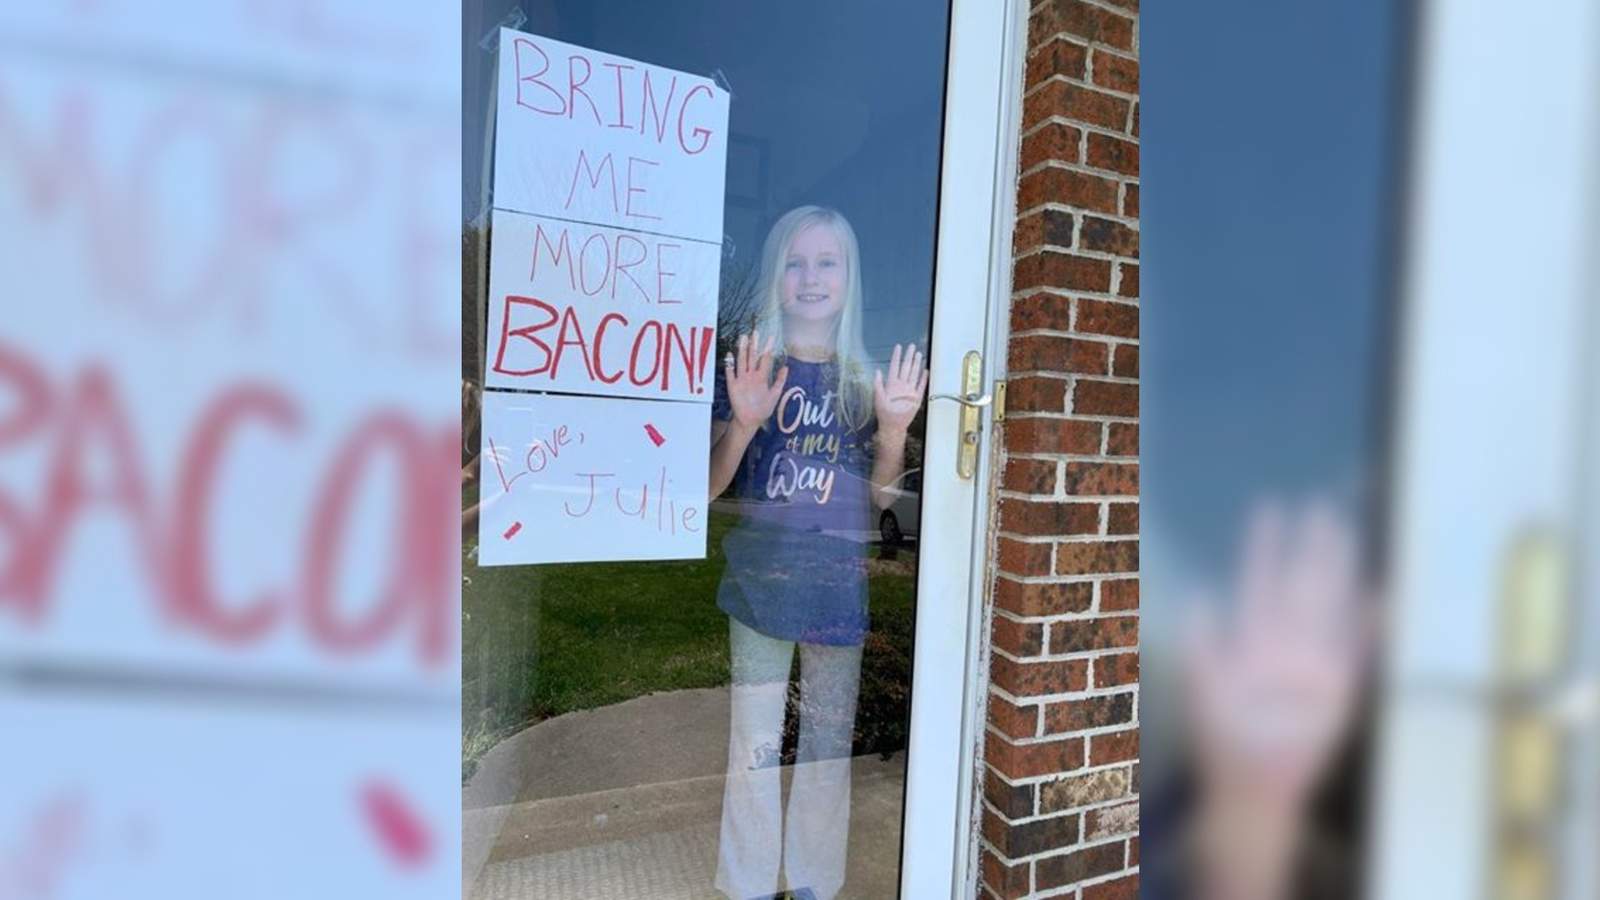 Wytheville 9-year-old asking for bacon during stay-at-home order